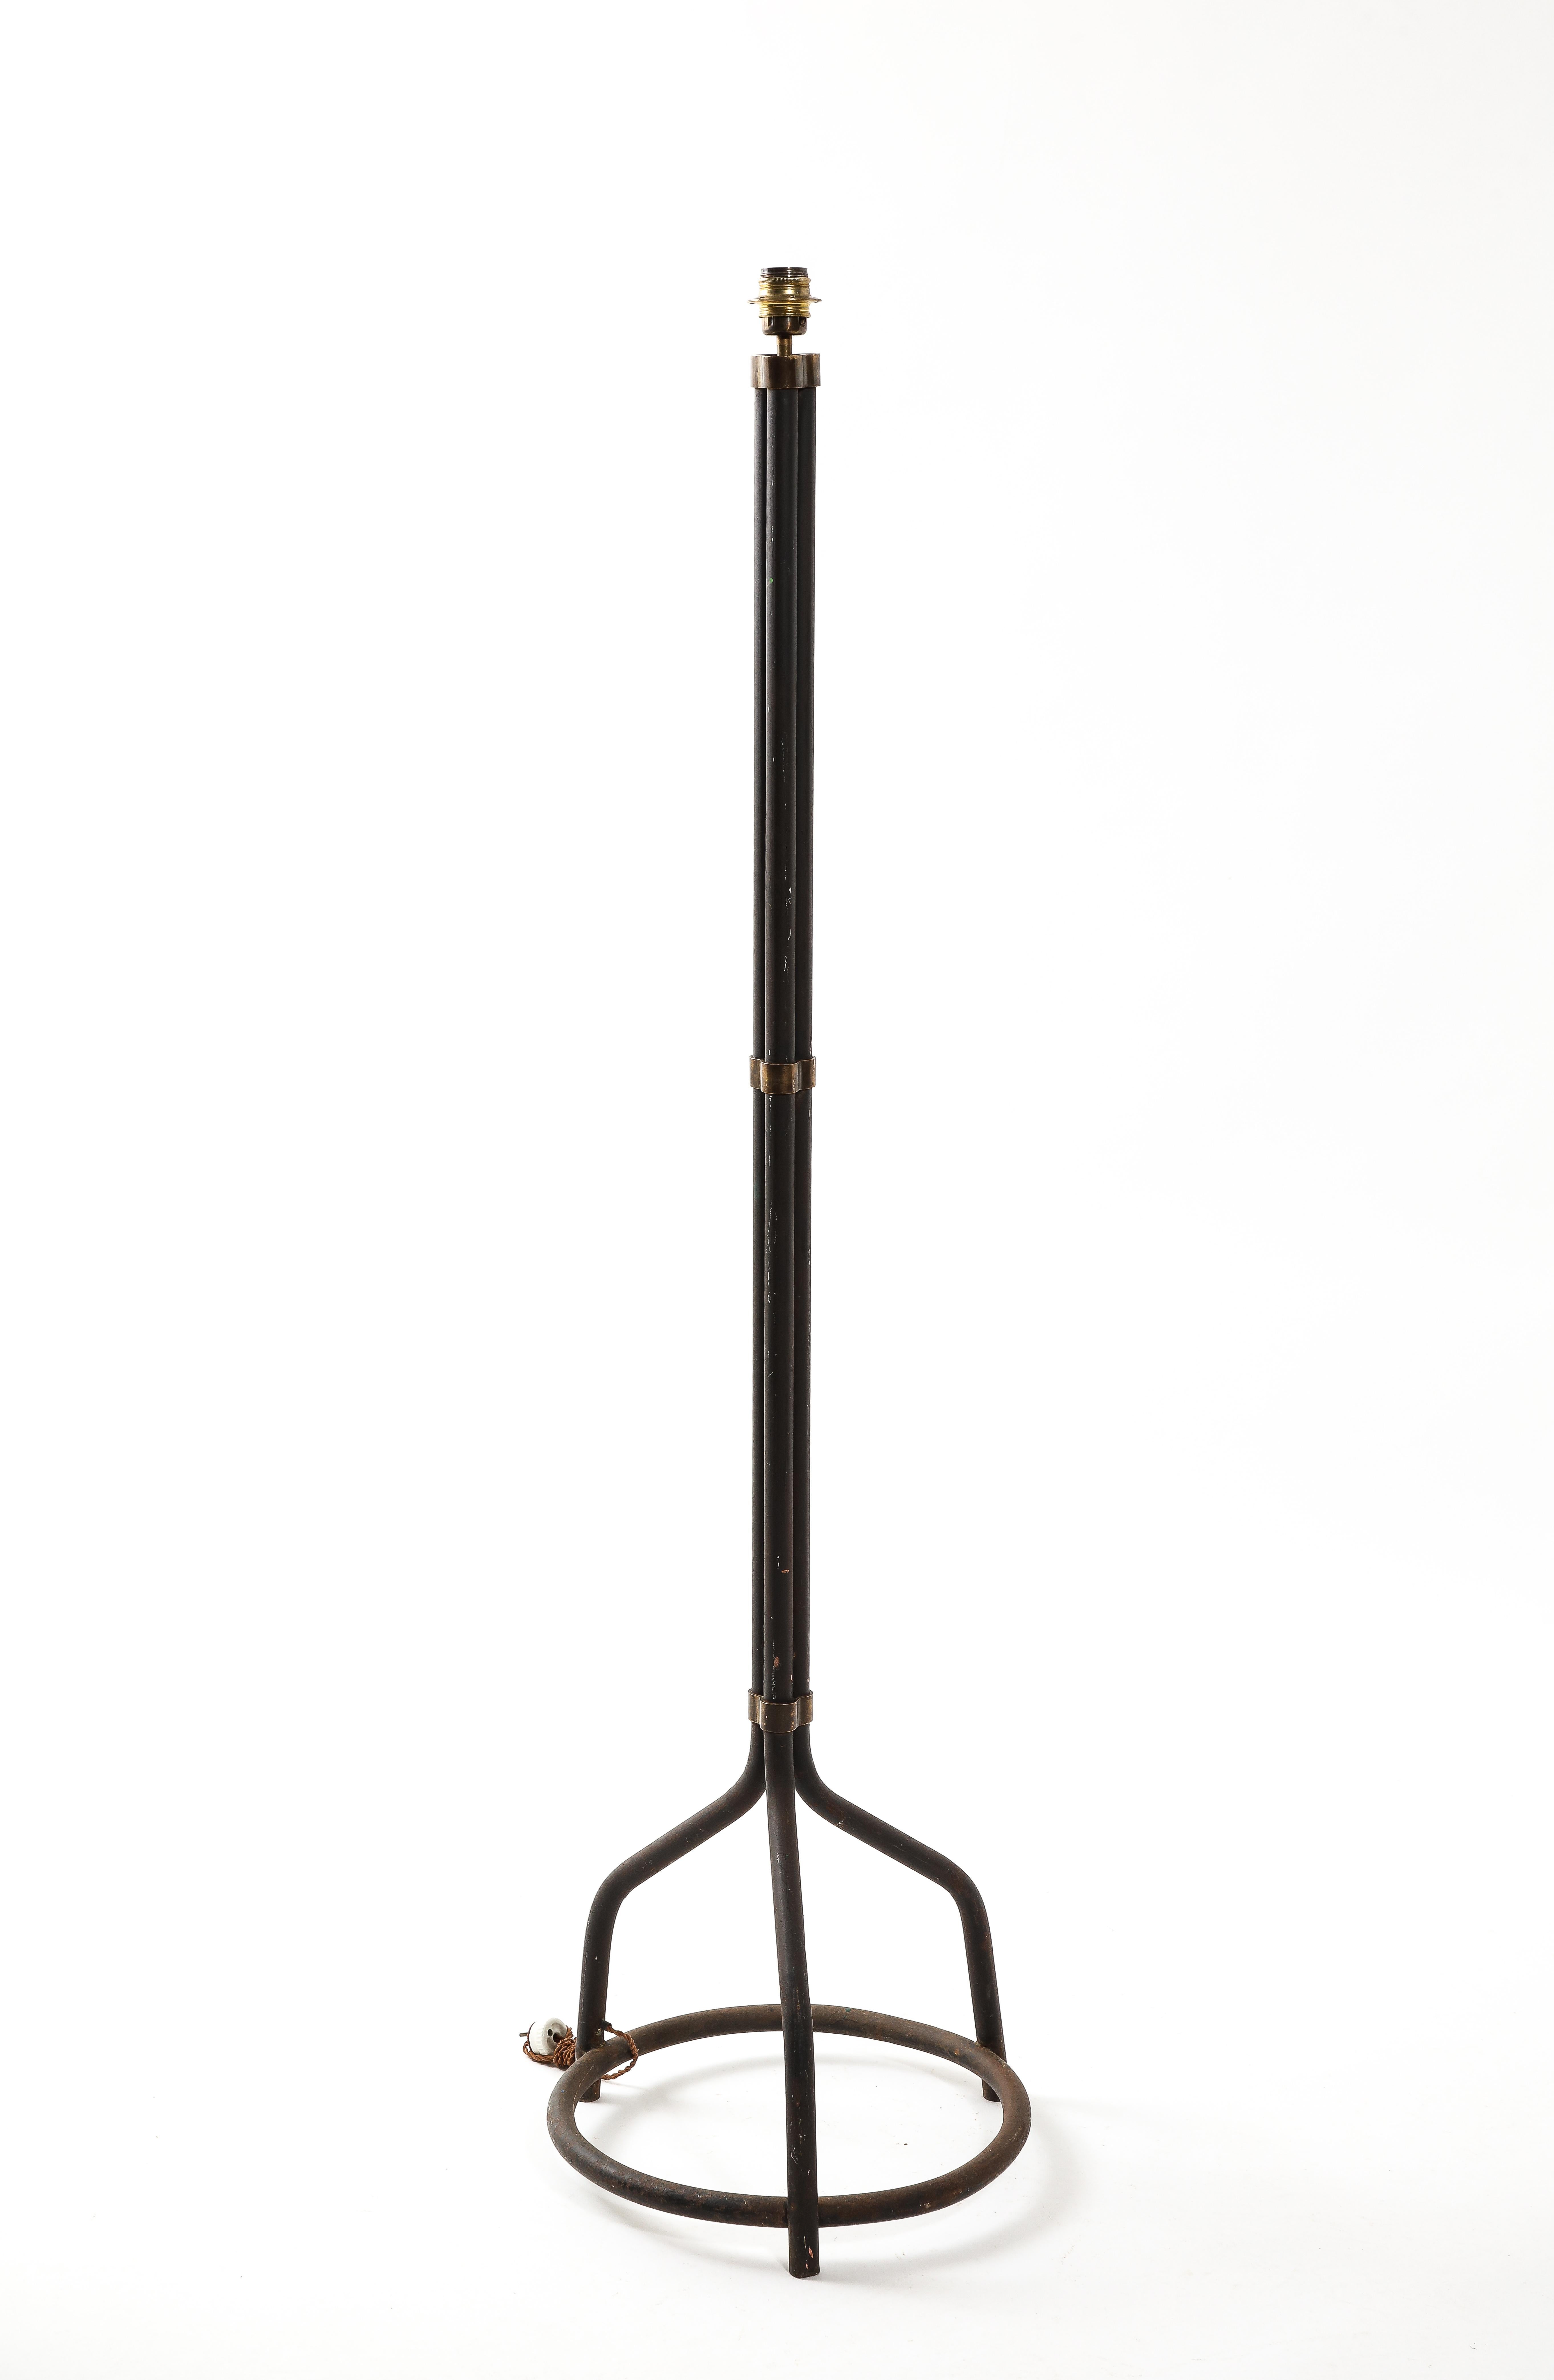 Brutalist Tripod Steel Tube Floor Lamp with Brass Details - France 1970's In Fair Condition For Sale In New York, NY